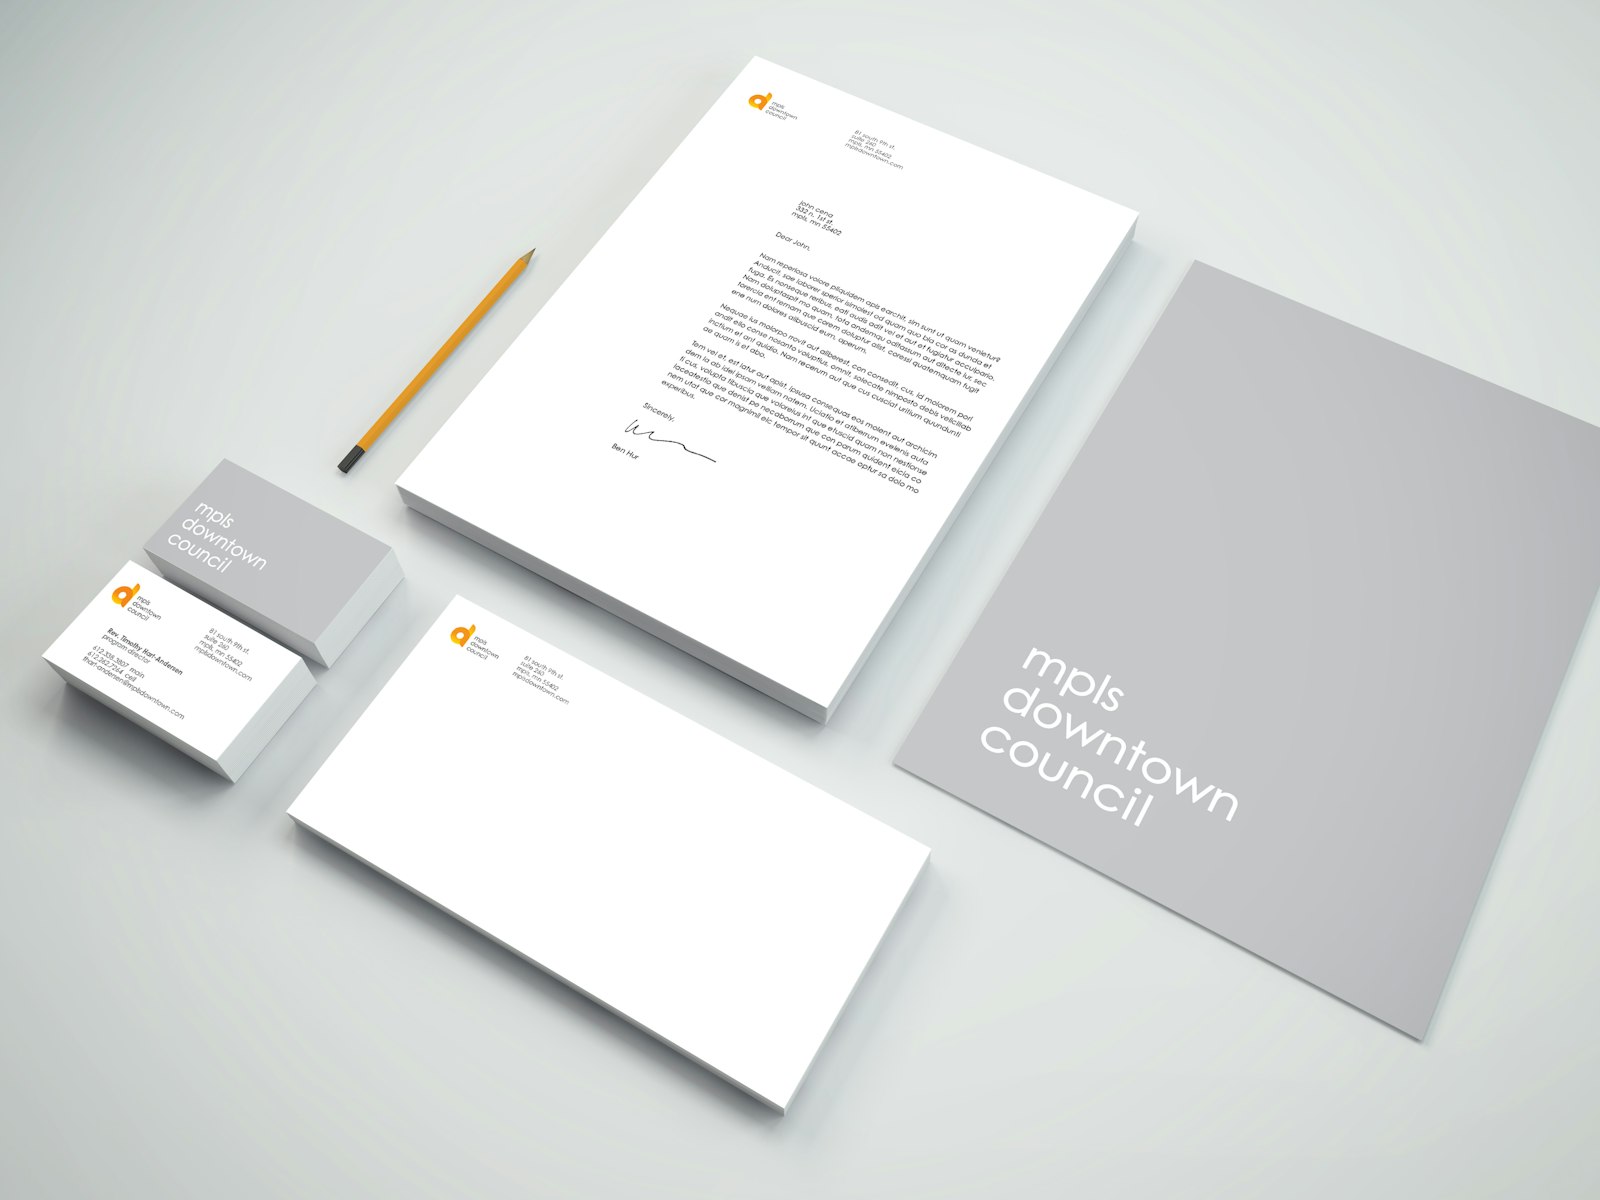 The Minneapolis Downtown Council brand design with letterhead and business cards.